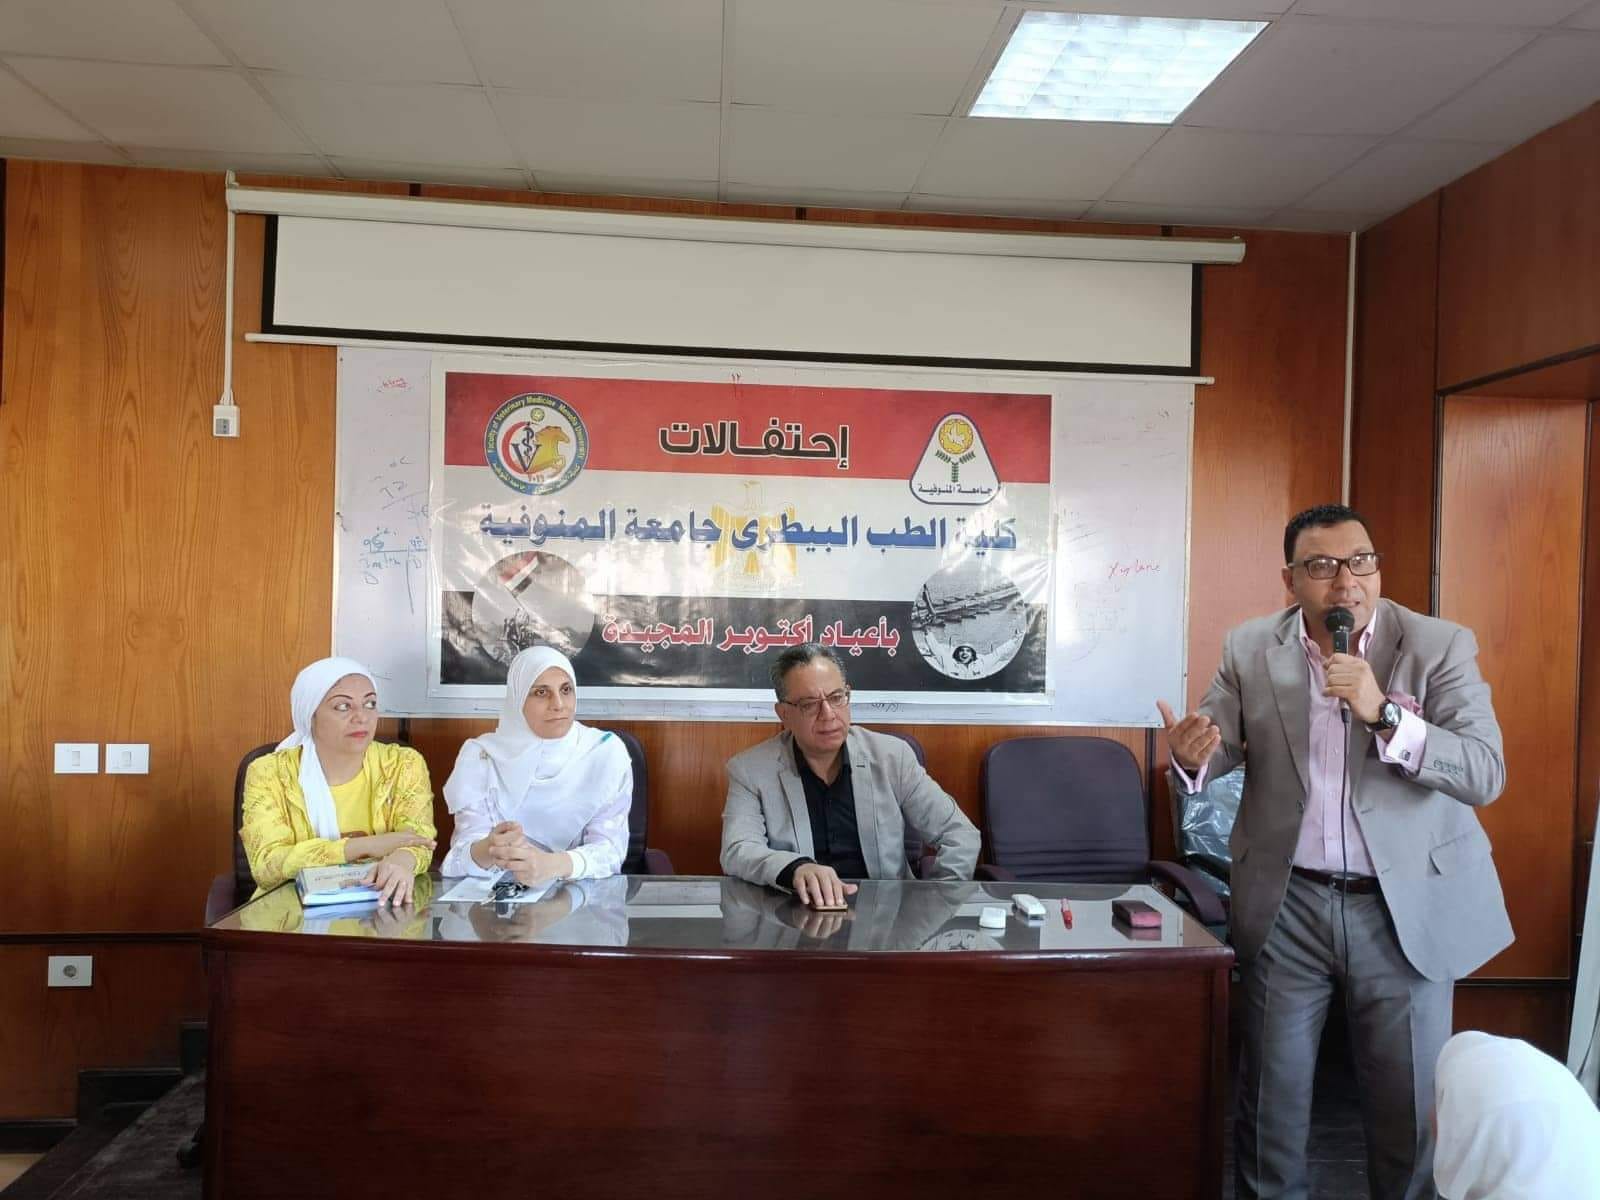 The virtue of martyrdom and the role of the armed forces in a symposium at the Faculty of Veterinary Medicine in Menoufia